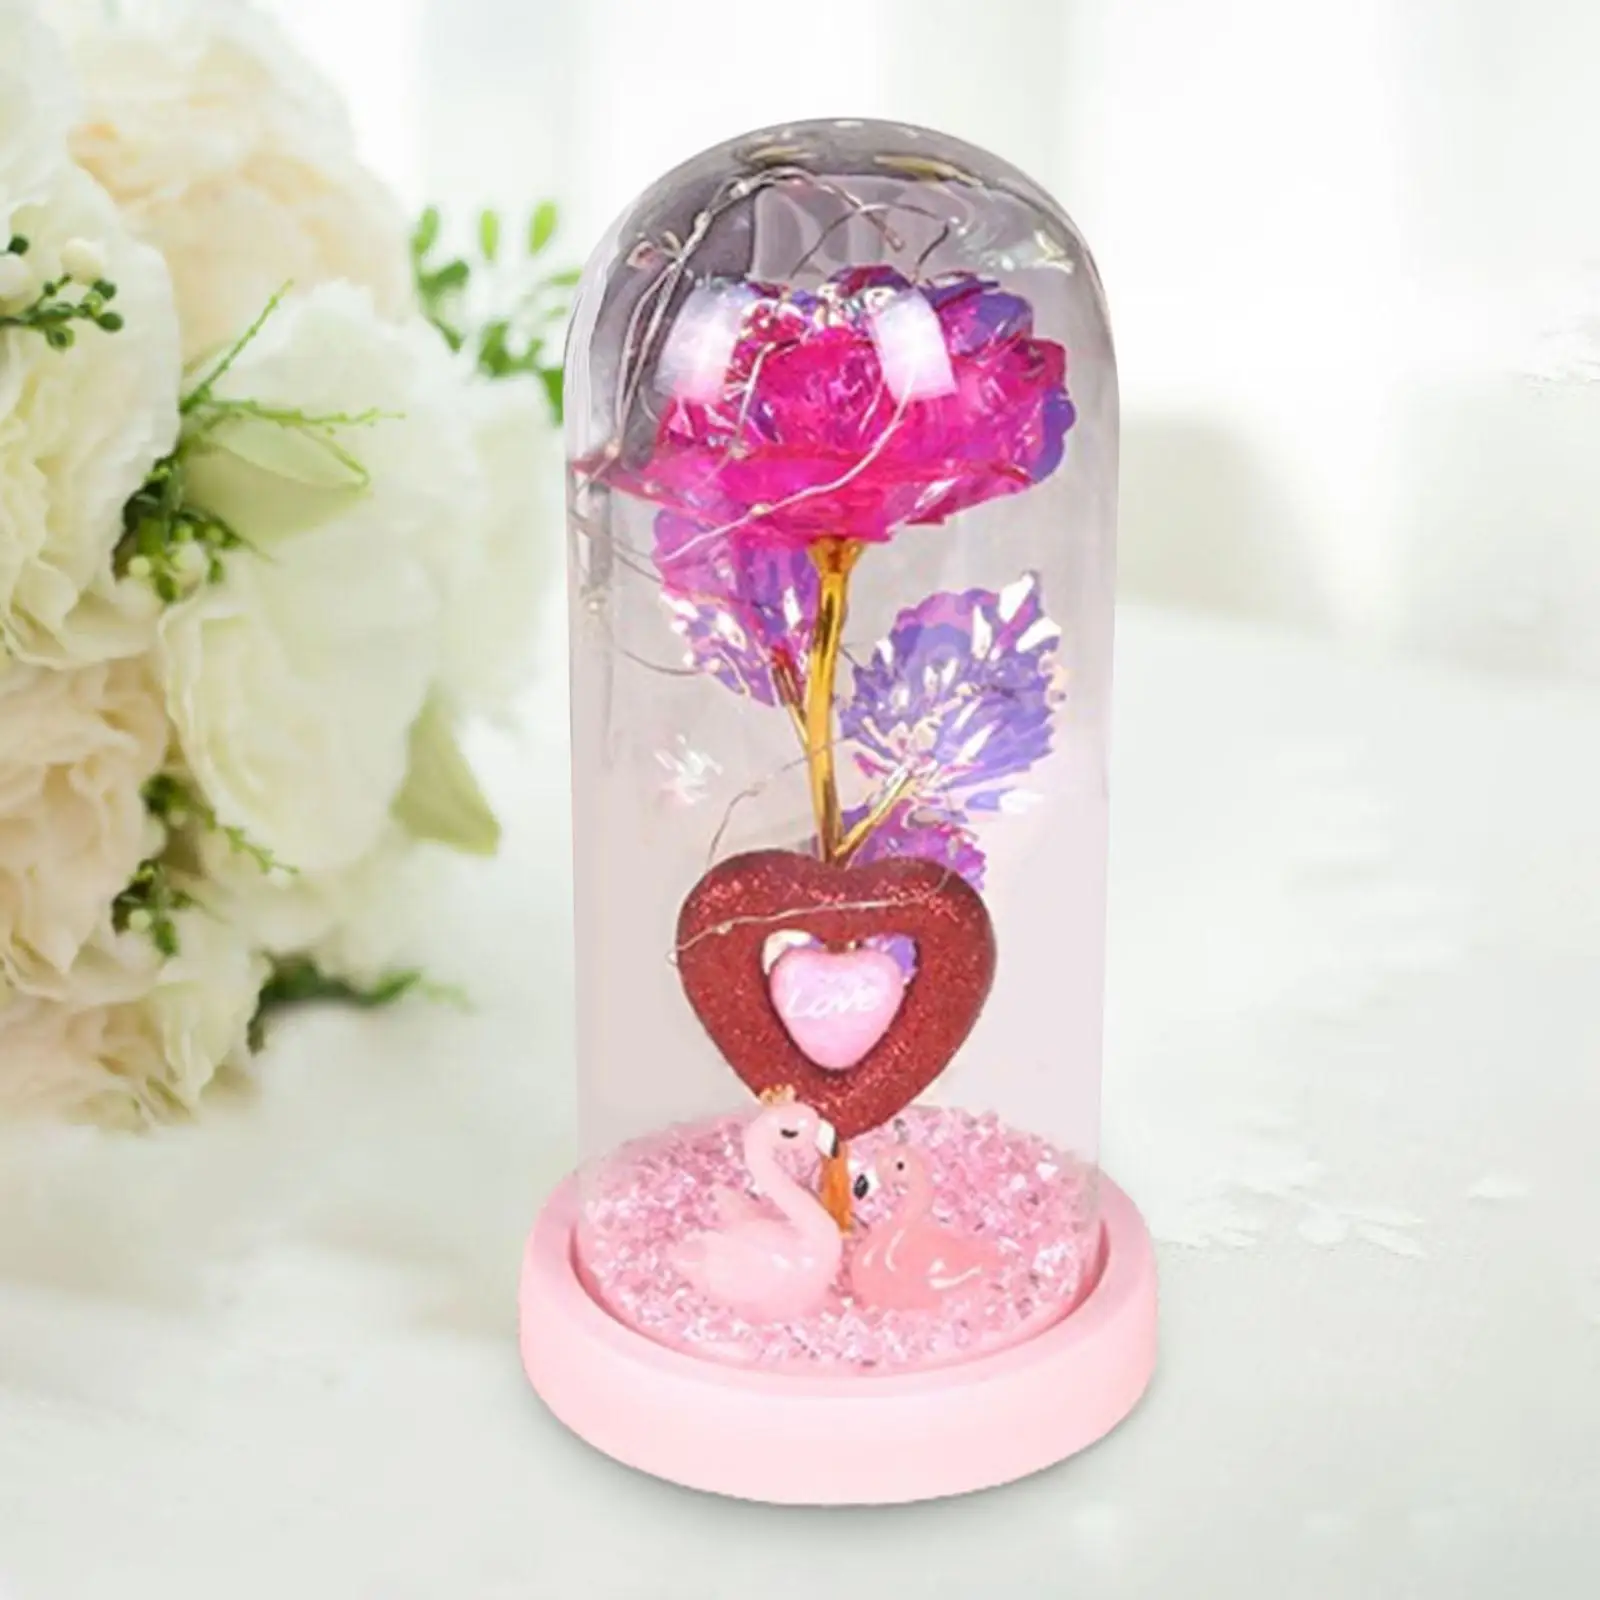 Glass Rose Flower Gift Valentines Day Decor Valentines Day Gifts for Men Eternal Birthday Gift Crafts Rose Flower in Dome Glass